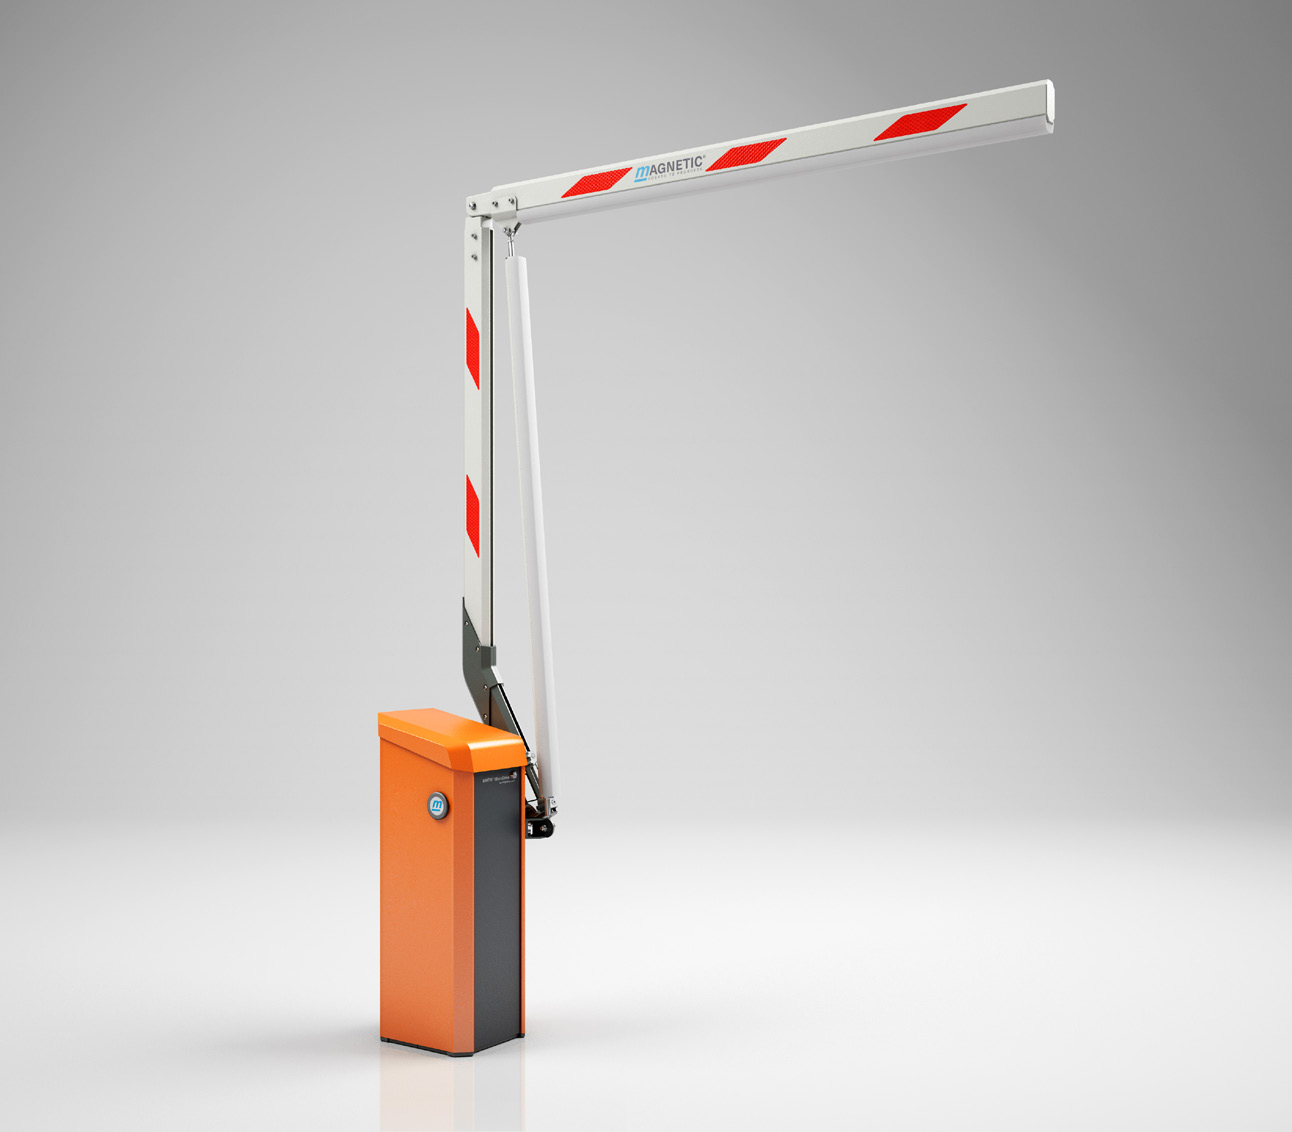 Magnetic Parking Pro parking barriers